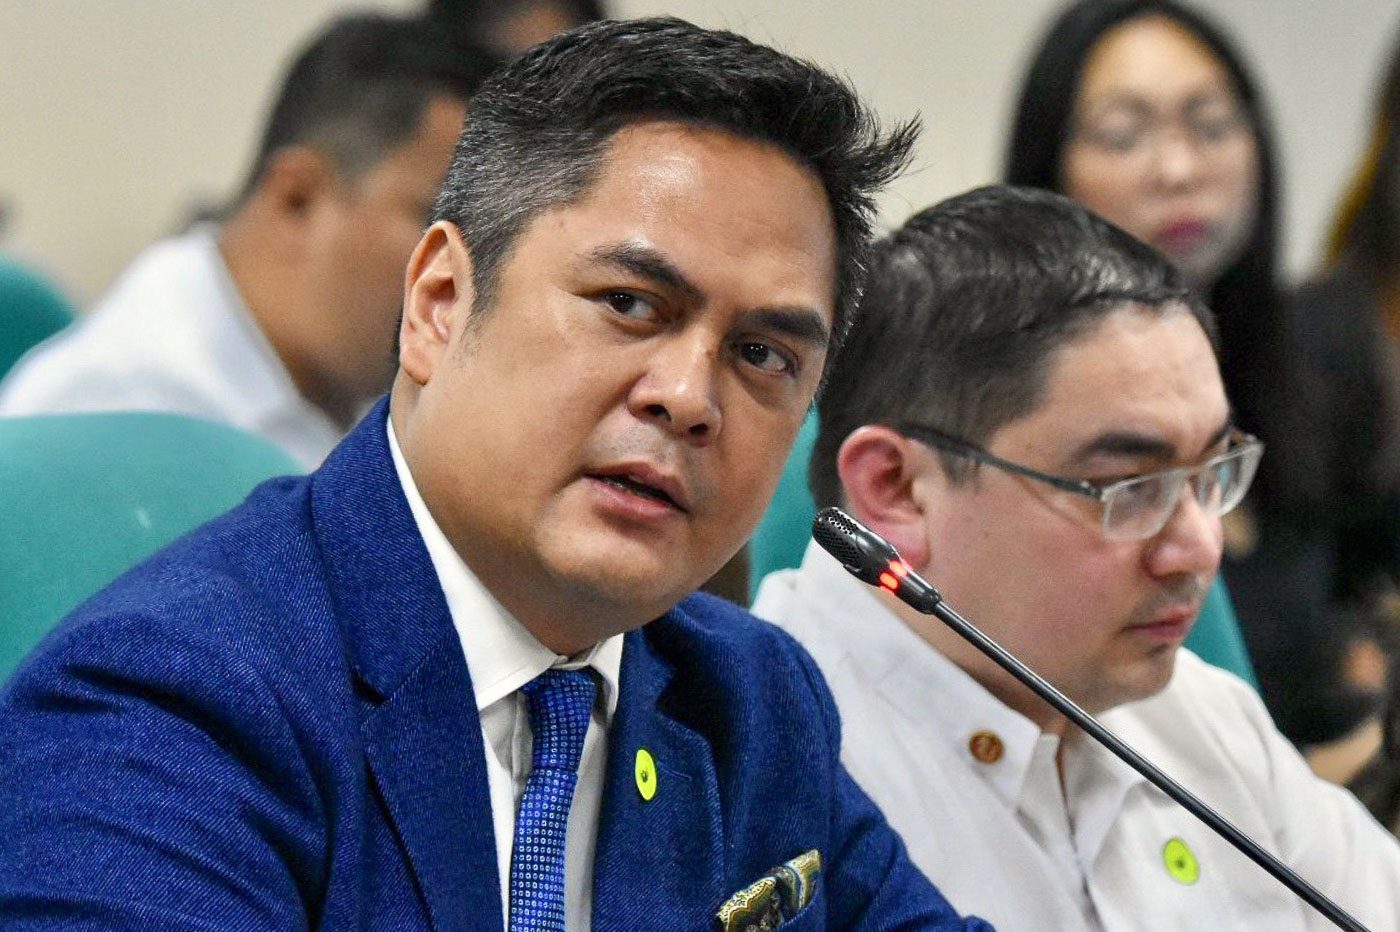 Rights groups blast Andanar’s ‘perilous’ attempts to ‘mislead’ U.N. council